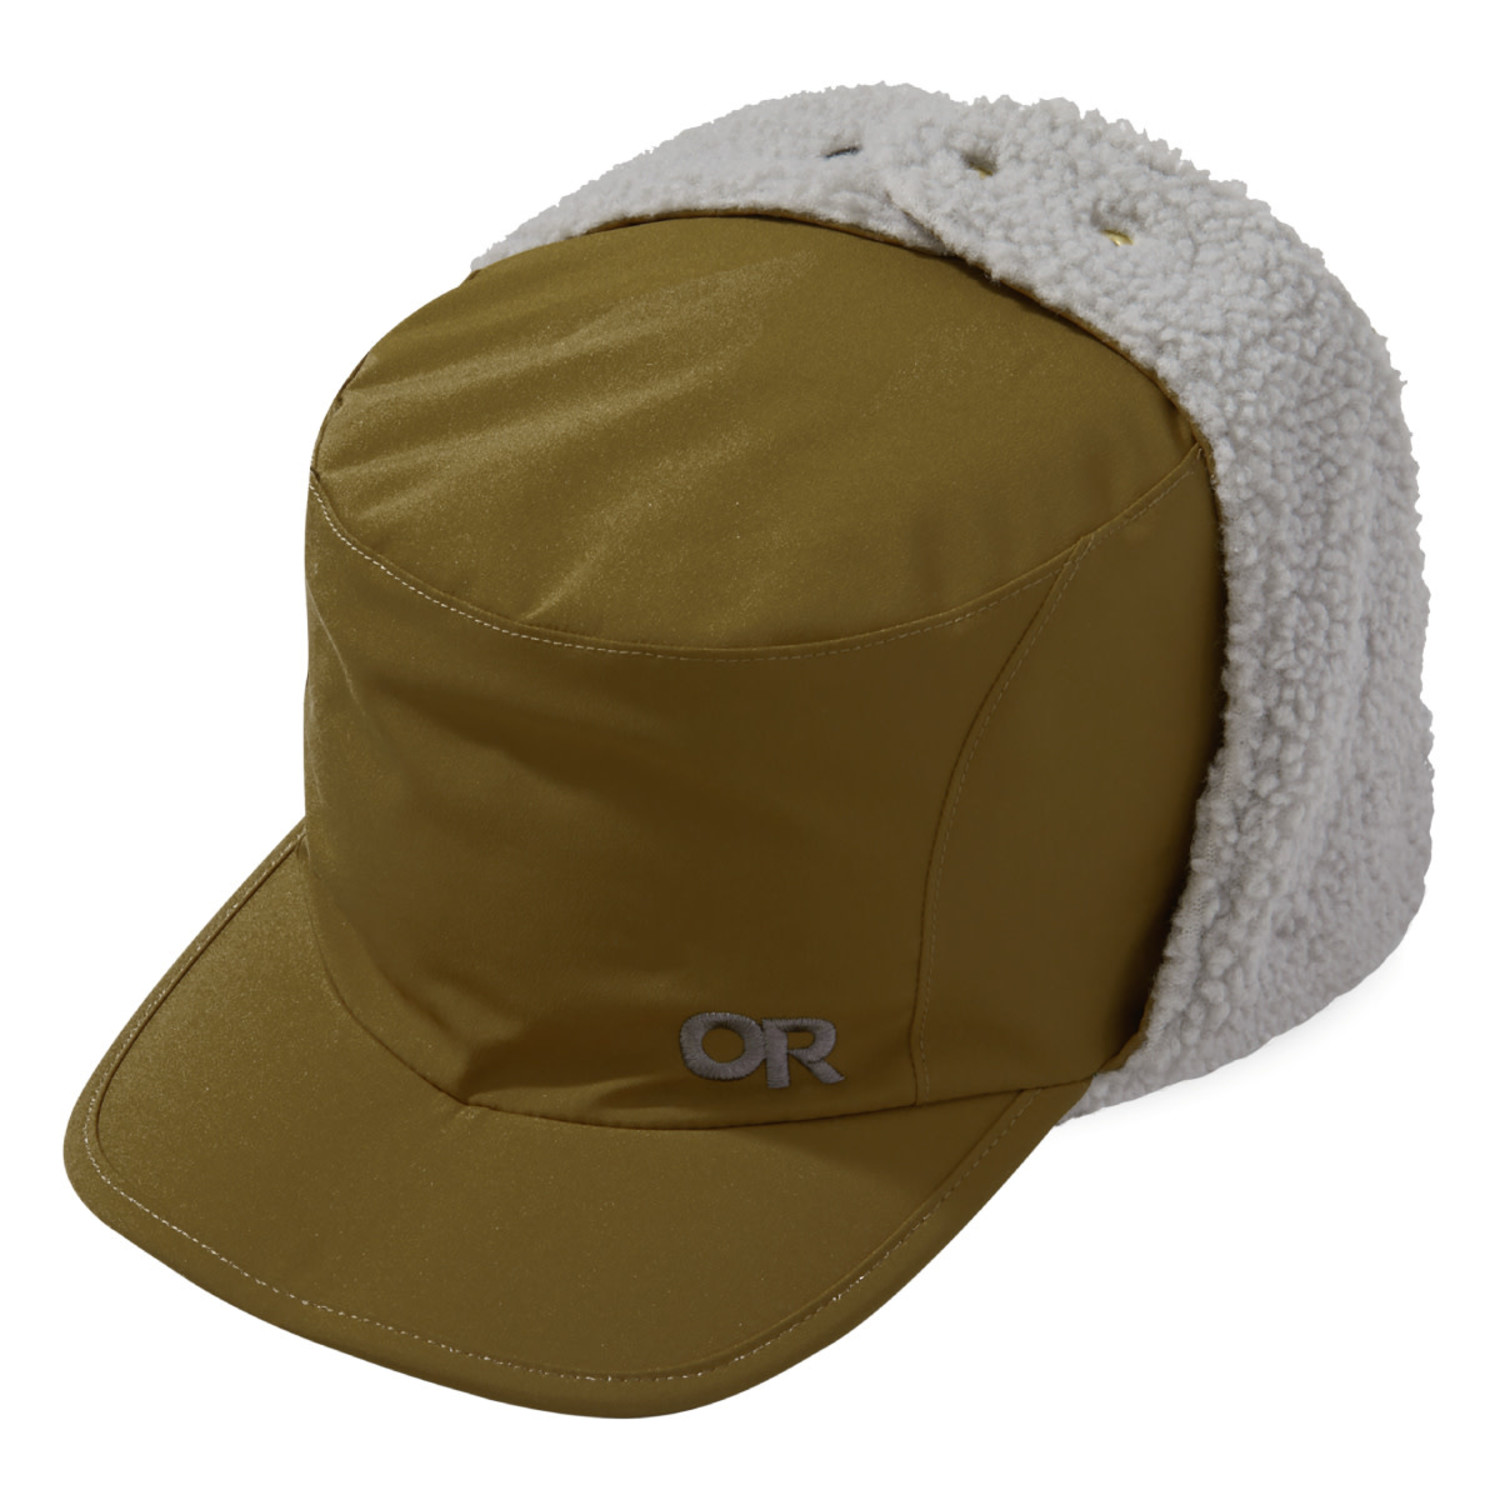 Outdoor Research Whitefish Hat - Saddle, M